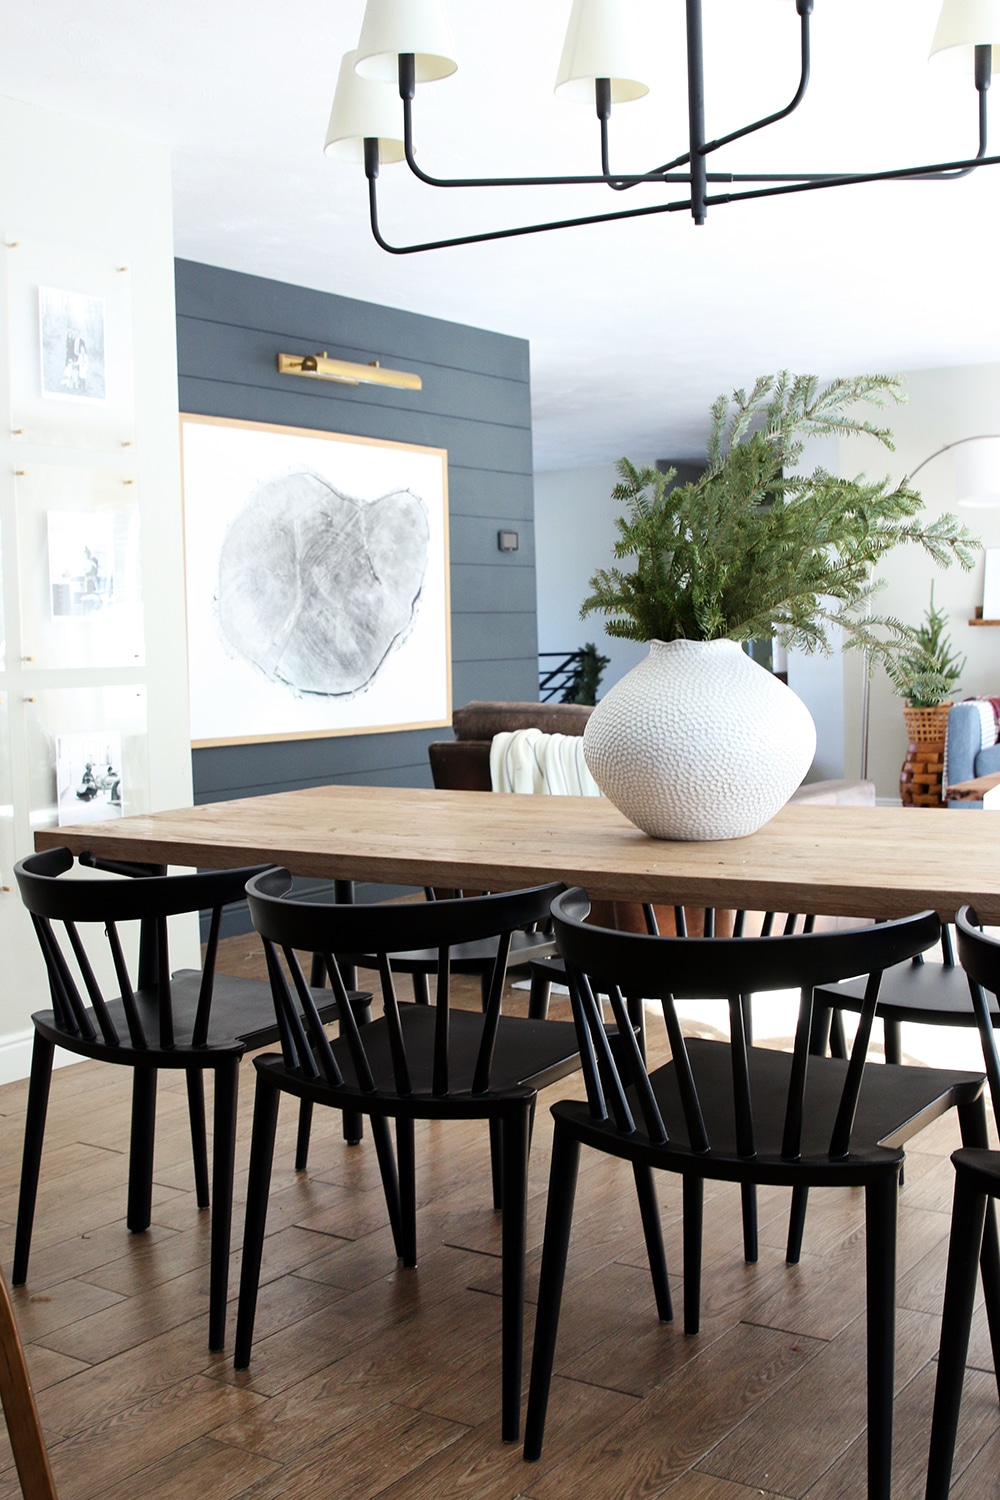 New Low Back Modern Spindle Chairs For The Dining Room Chris Loves Julia